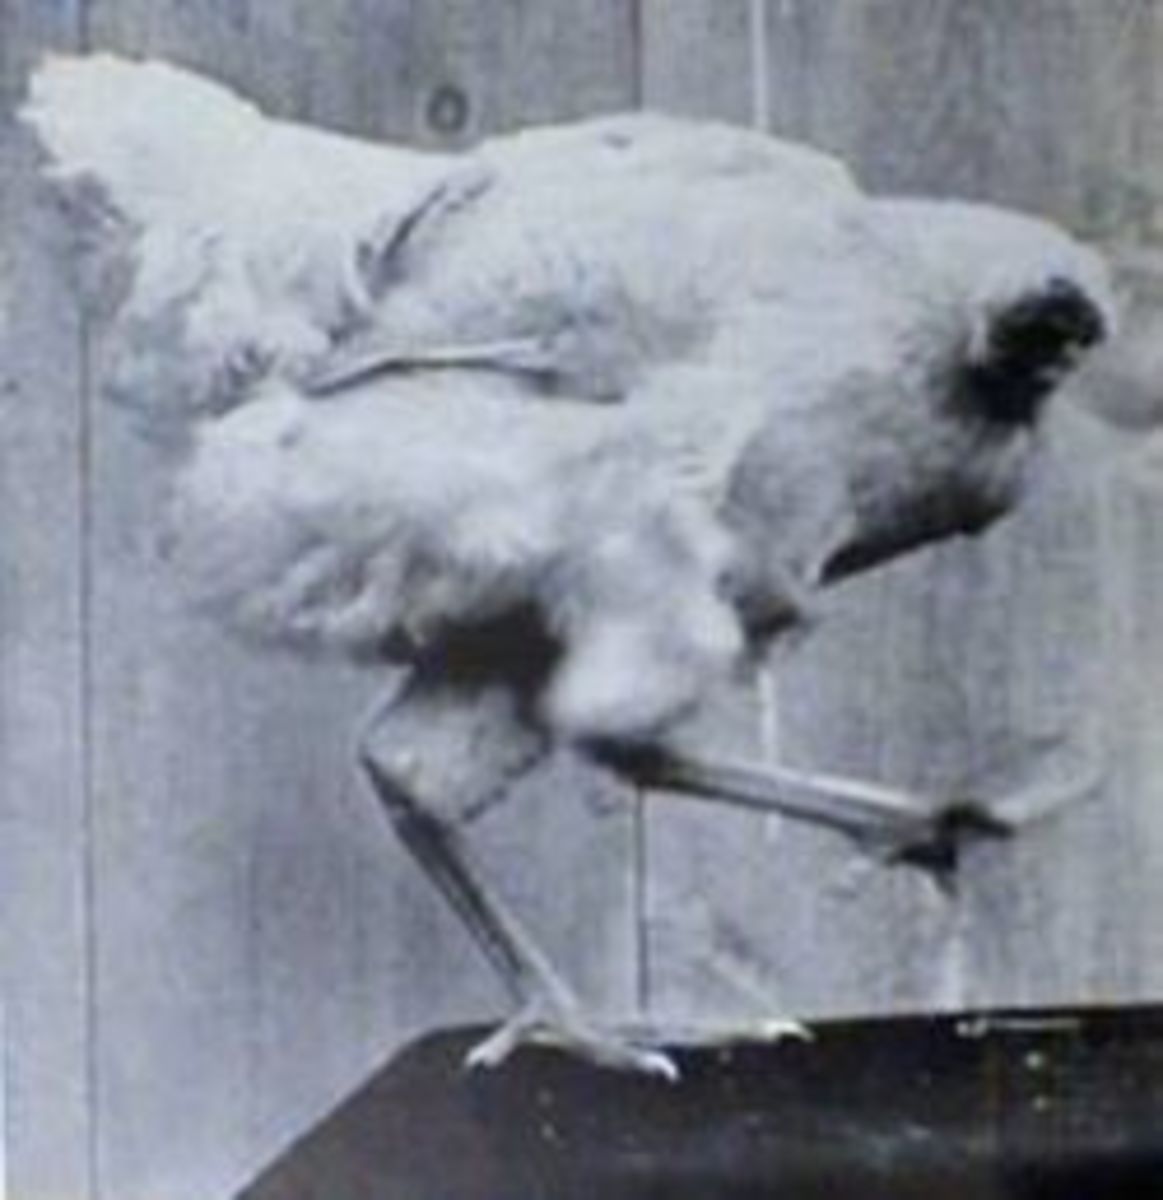 The Strange Tale of Mike the Headless Chicken